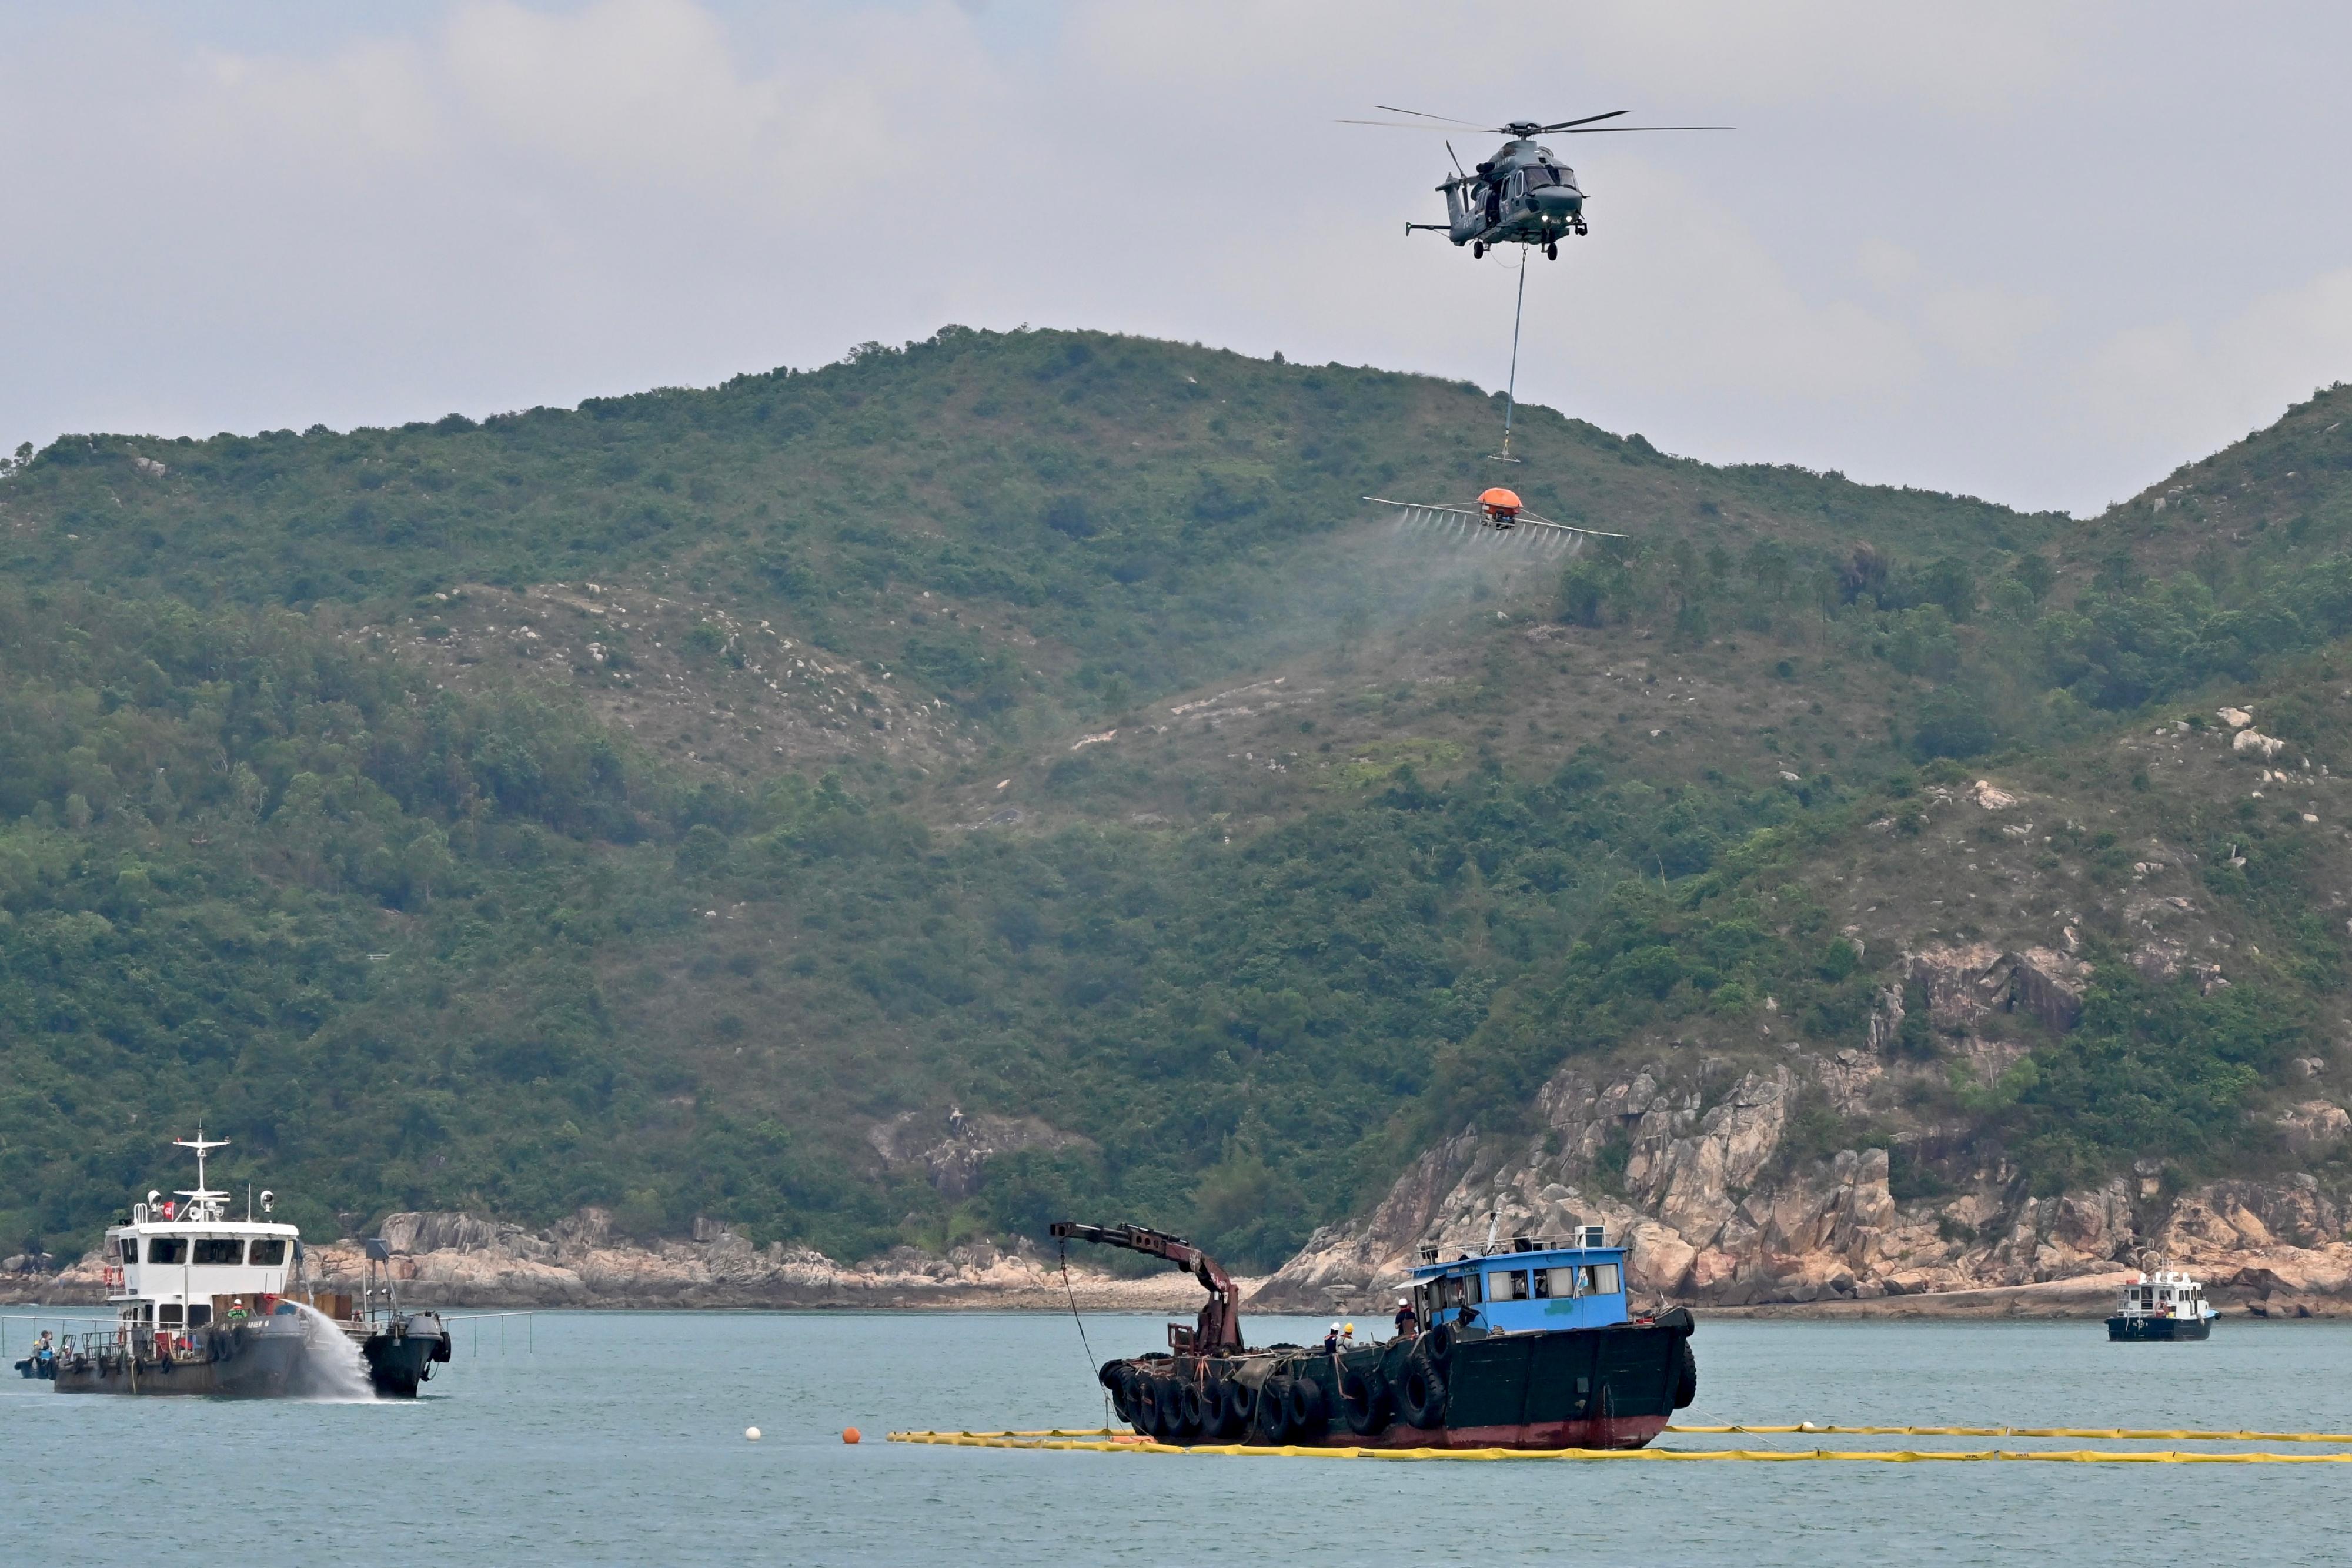 The annual marine pollution joint response exercises, code-named Oilex 2023 and Maritime Hazardous and Noxious Substances (HNS) 2023, were conducted by various government departments this morning (October 26) in the waters west of Lamma Island to test their marine pollution responses in the event of spillage of oil and HNS in Hong Kong waters. Photo shows an oil spill response team cleaning up spilled oil on the sea surface. The Government Flying Service and other response groups also performed tasks at the scene.